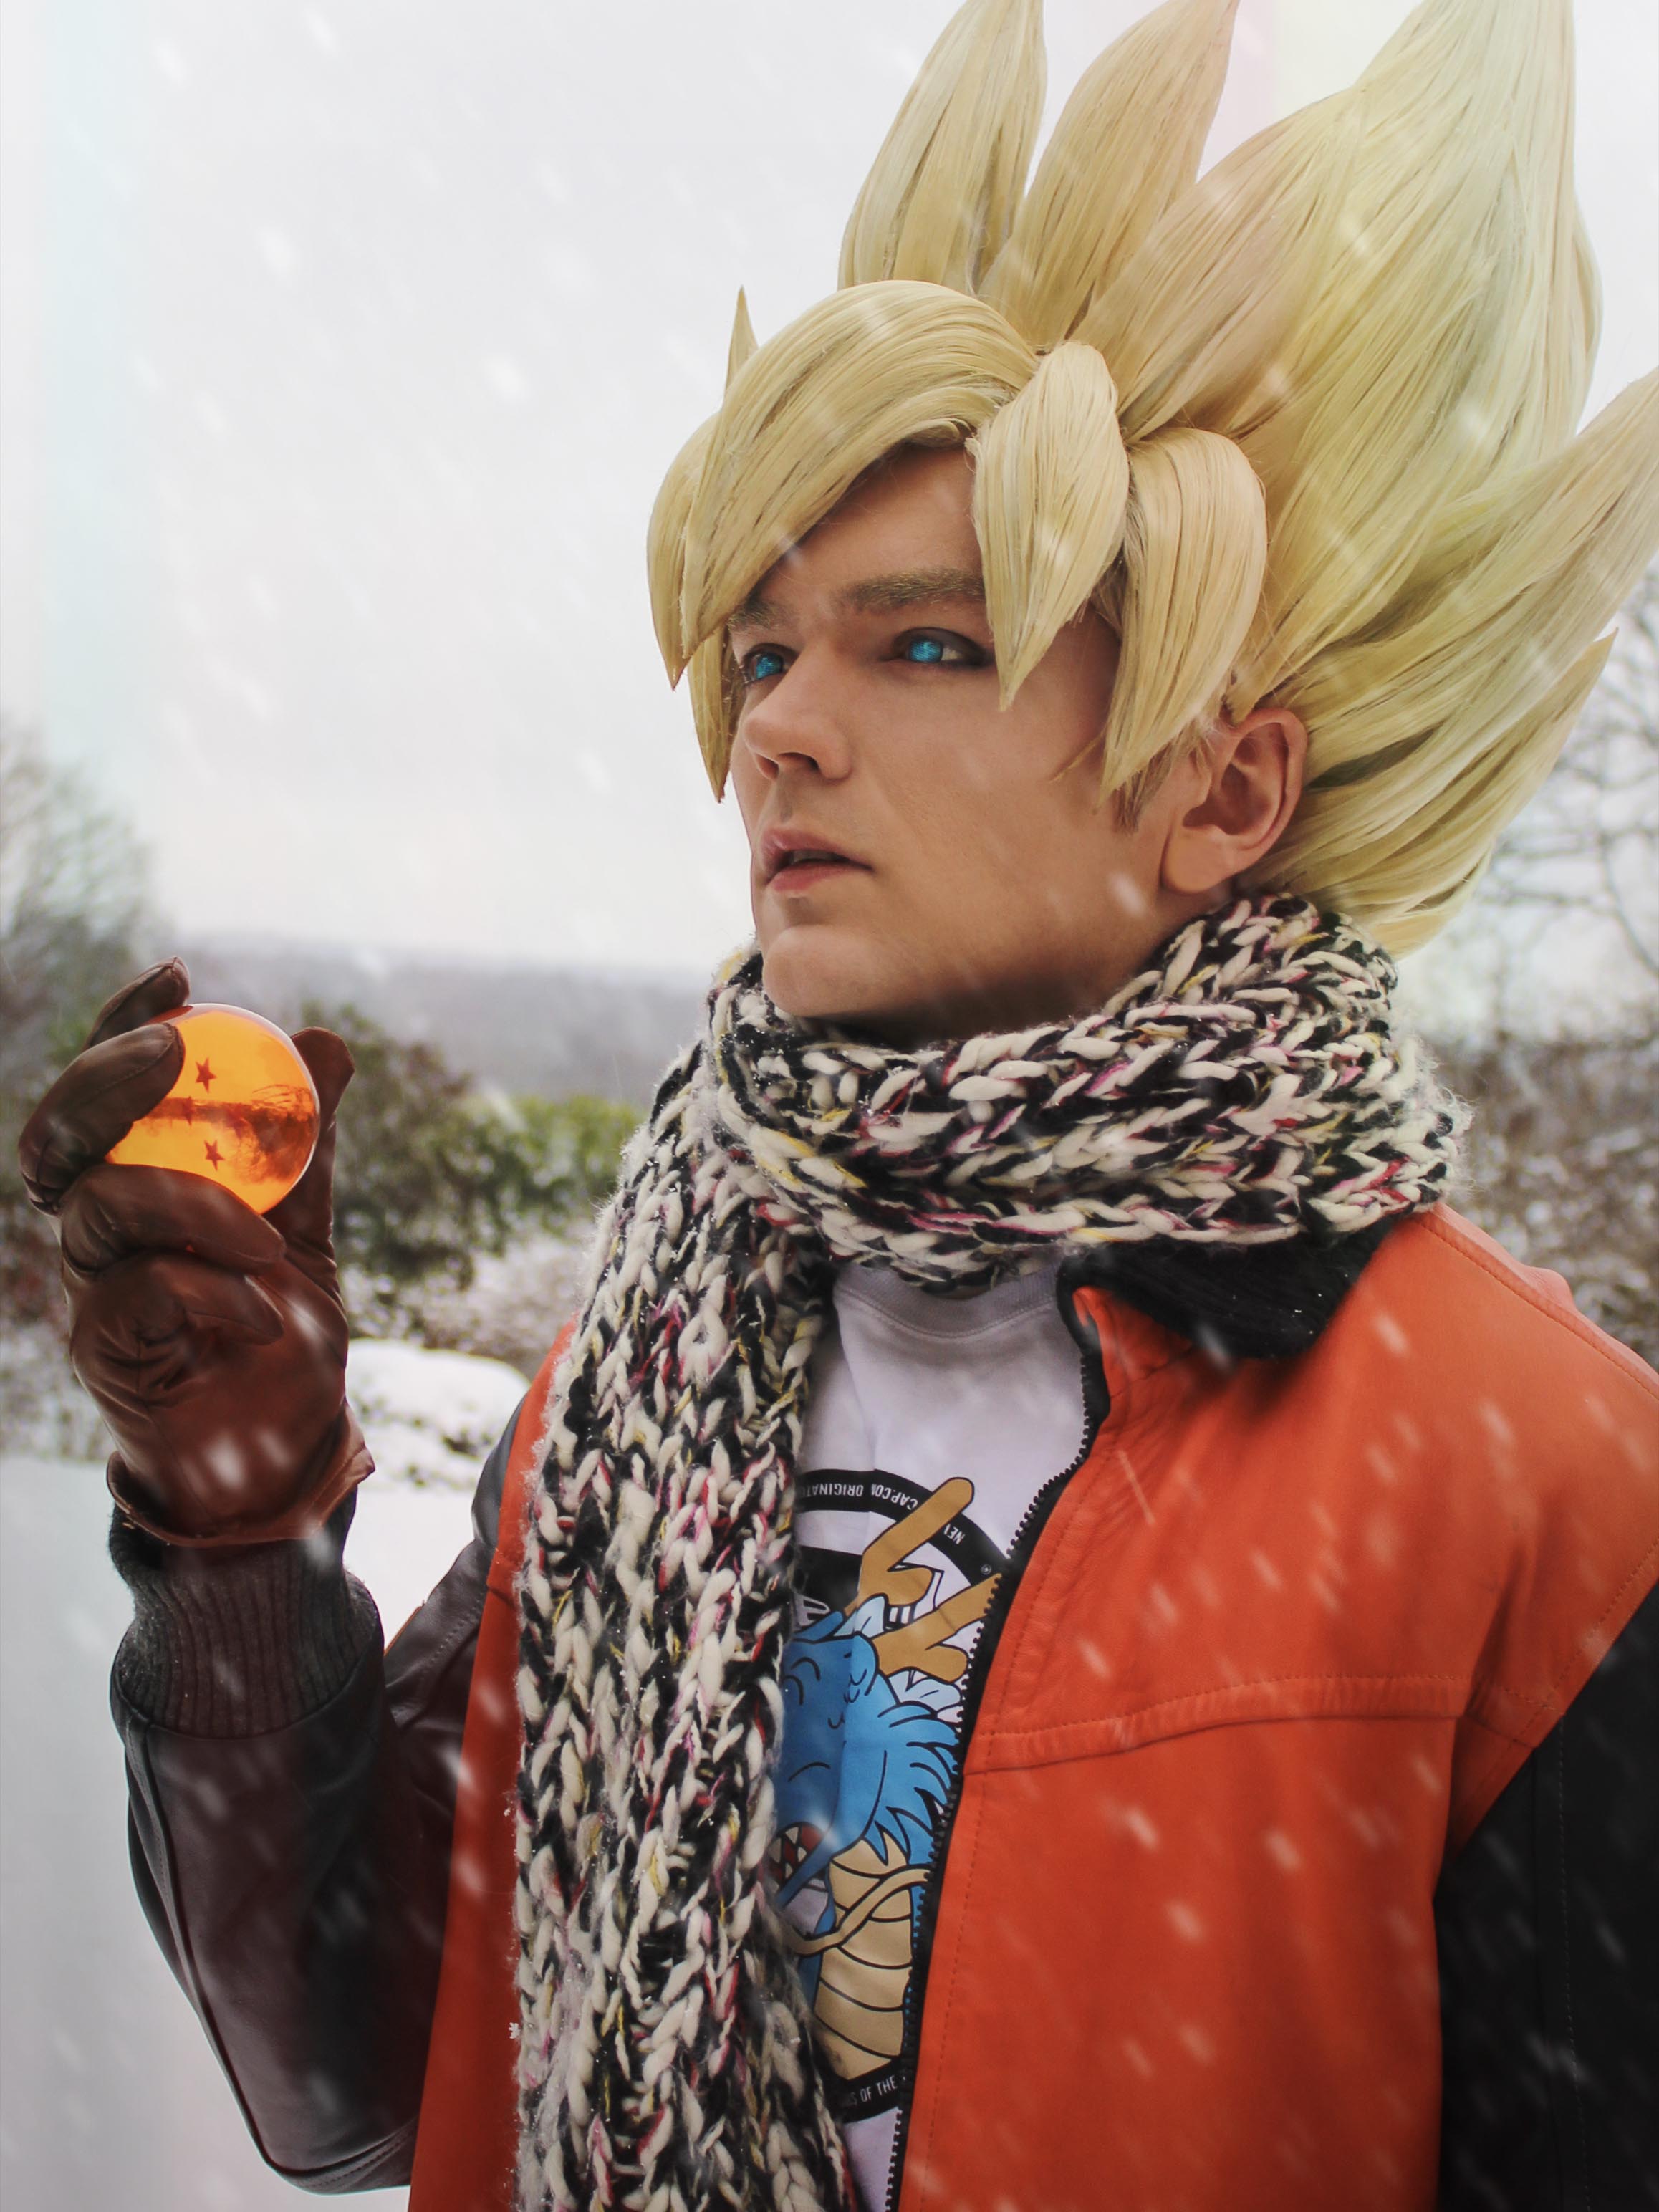 Super Saiyan Goku cosplay from dragonball z in the 59 cell games jacket